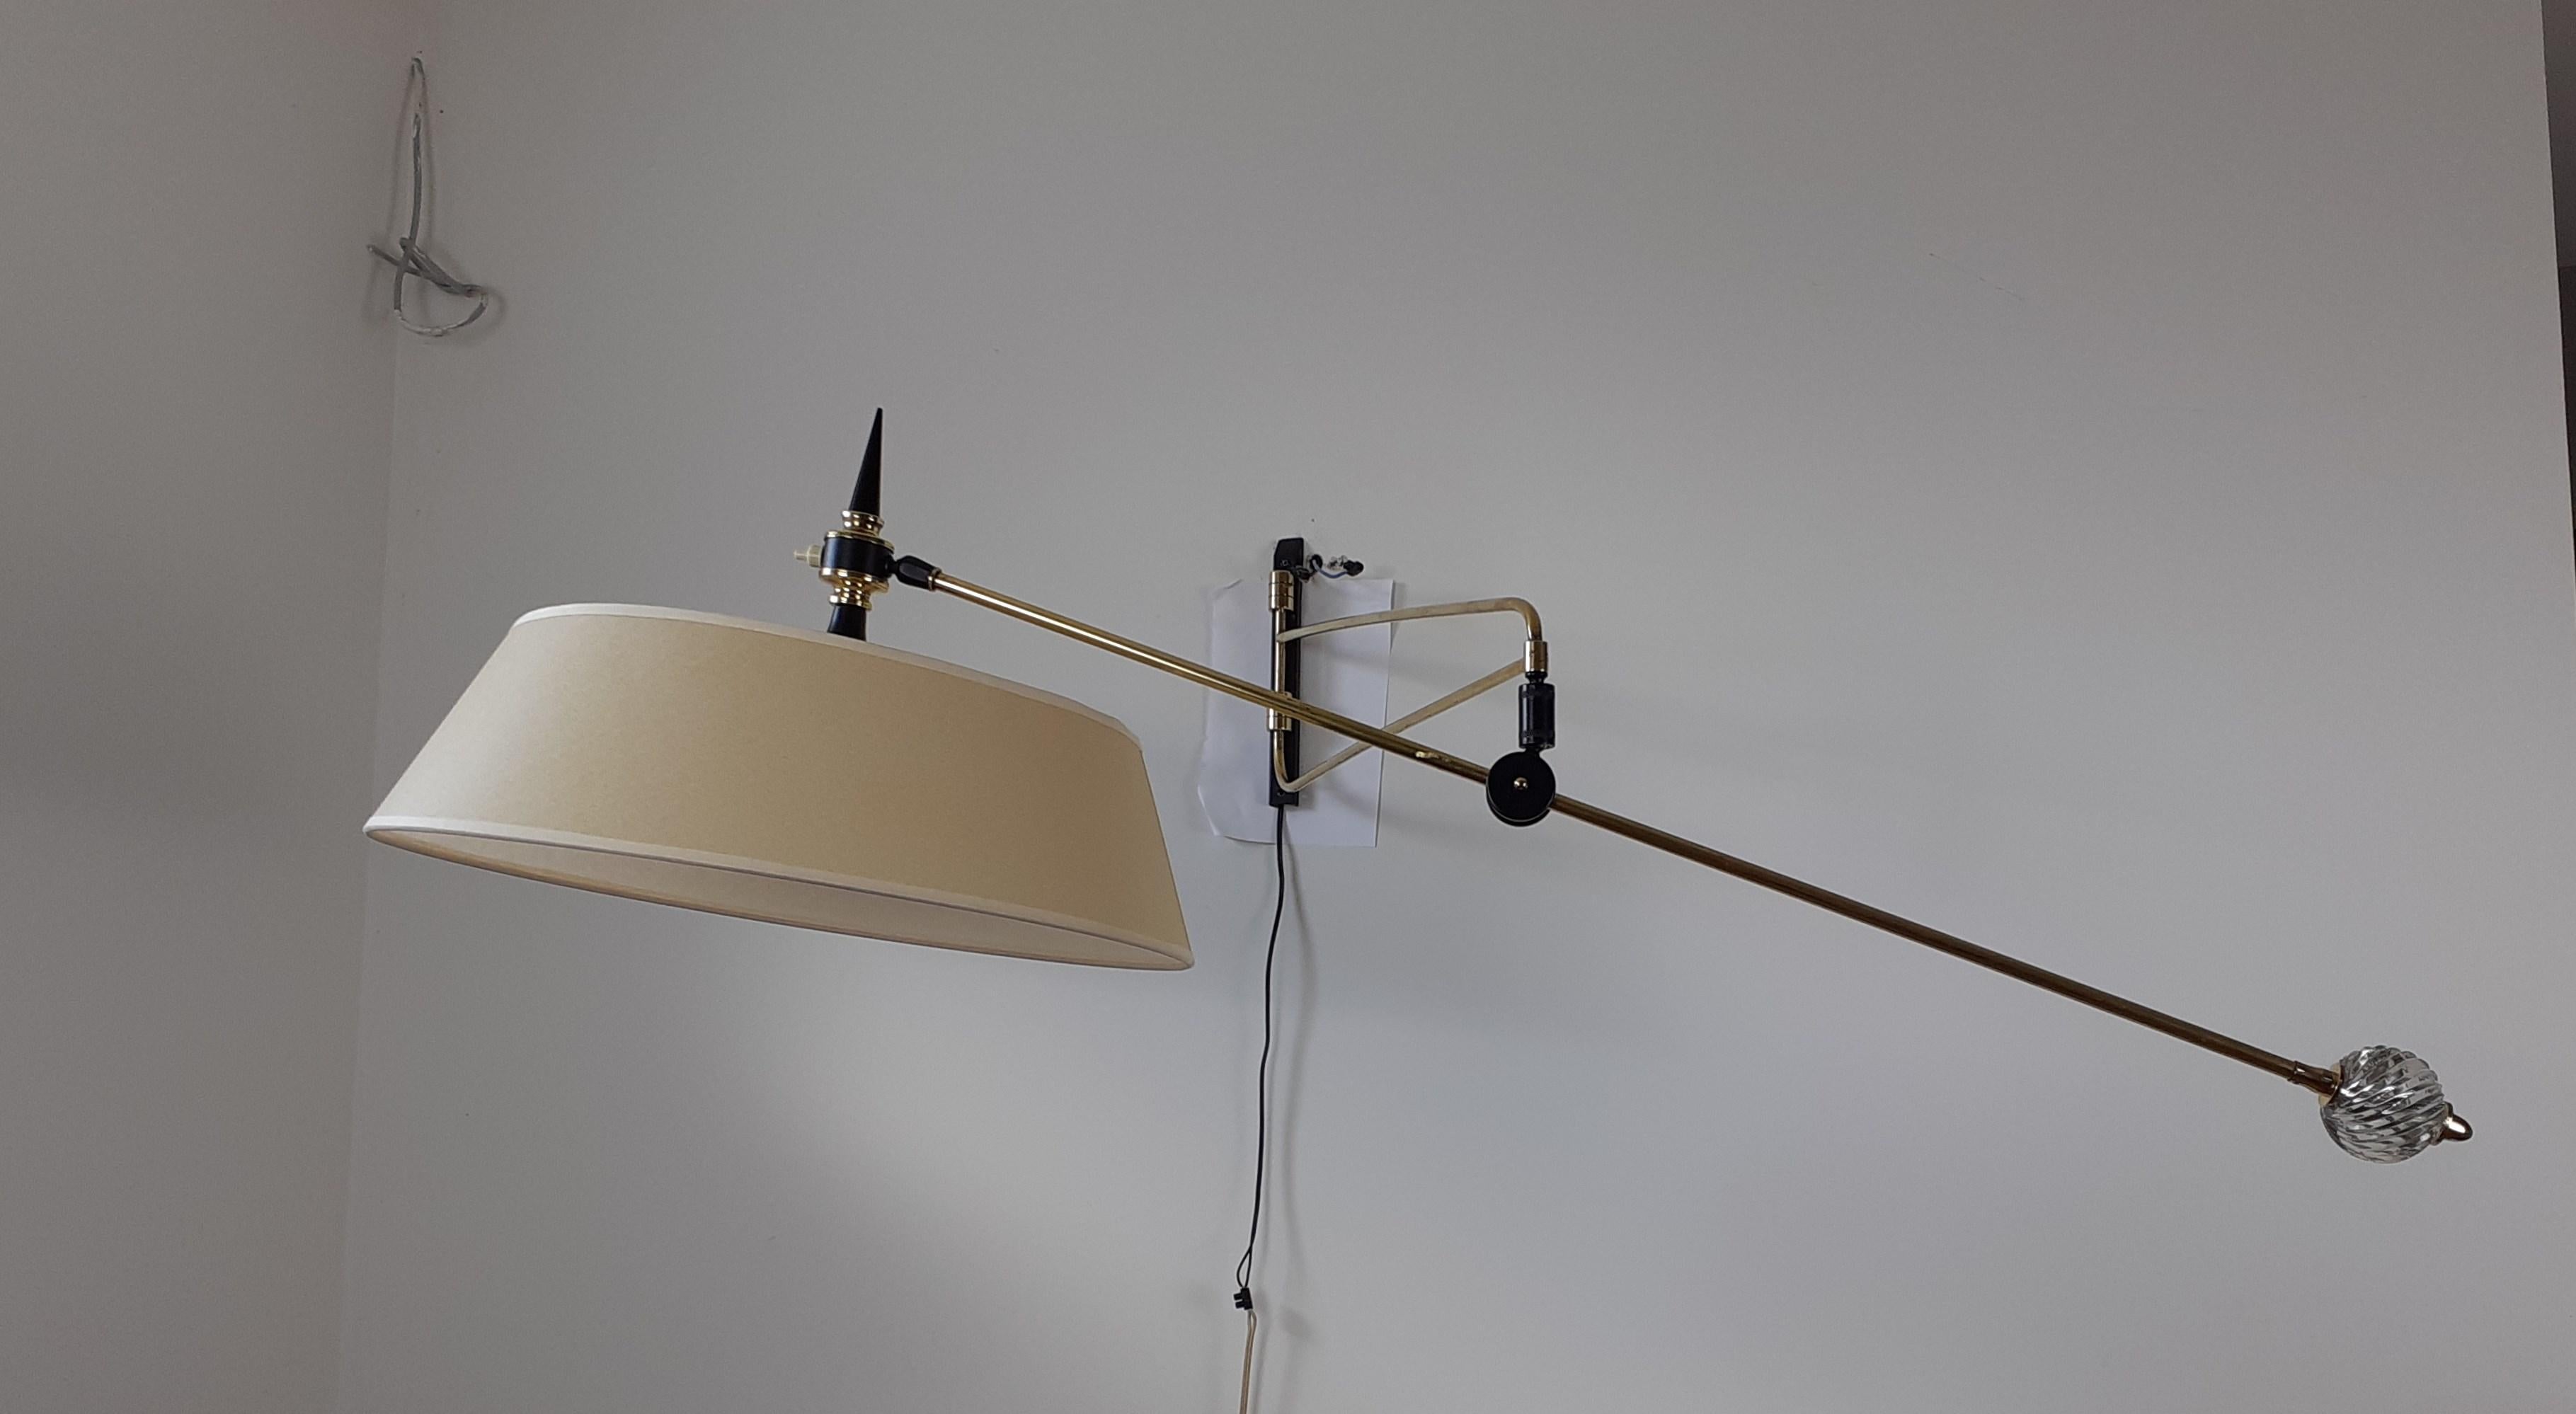 Wall lamp in black lacquered metal and brass composed of a rectangular base on which is fixed a double pivoting rod connected to an articulated brass arm. A glass ball allows the orientation and inclination of the arm of light.
A circular